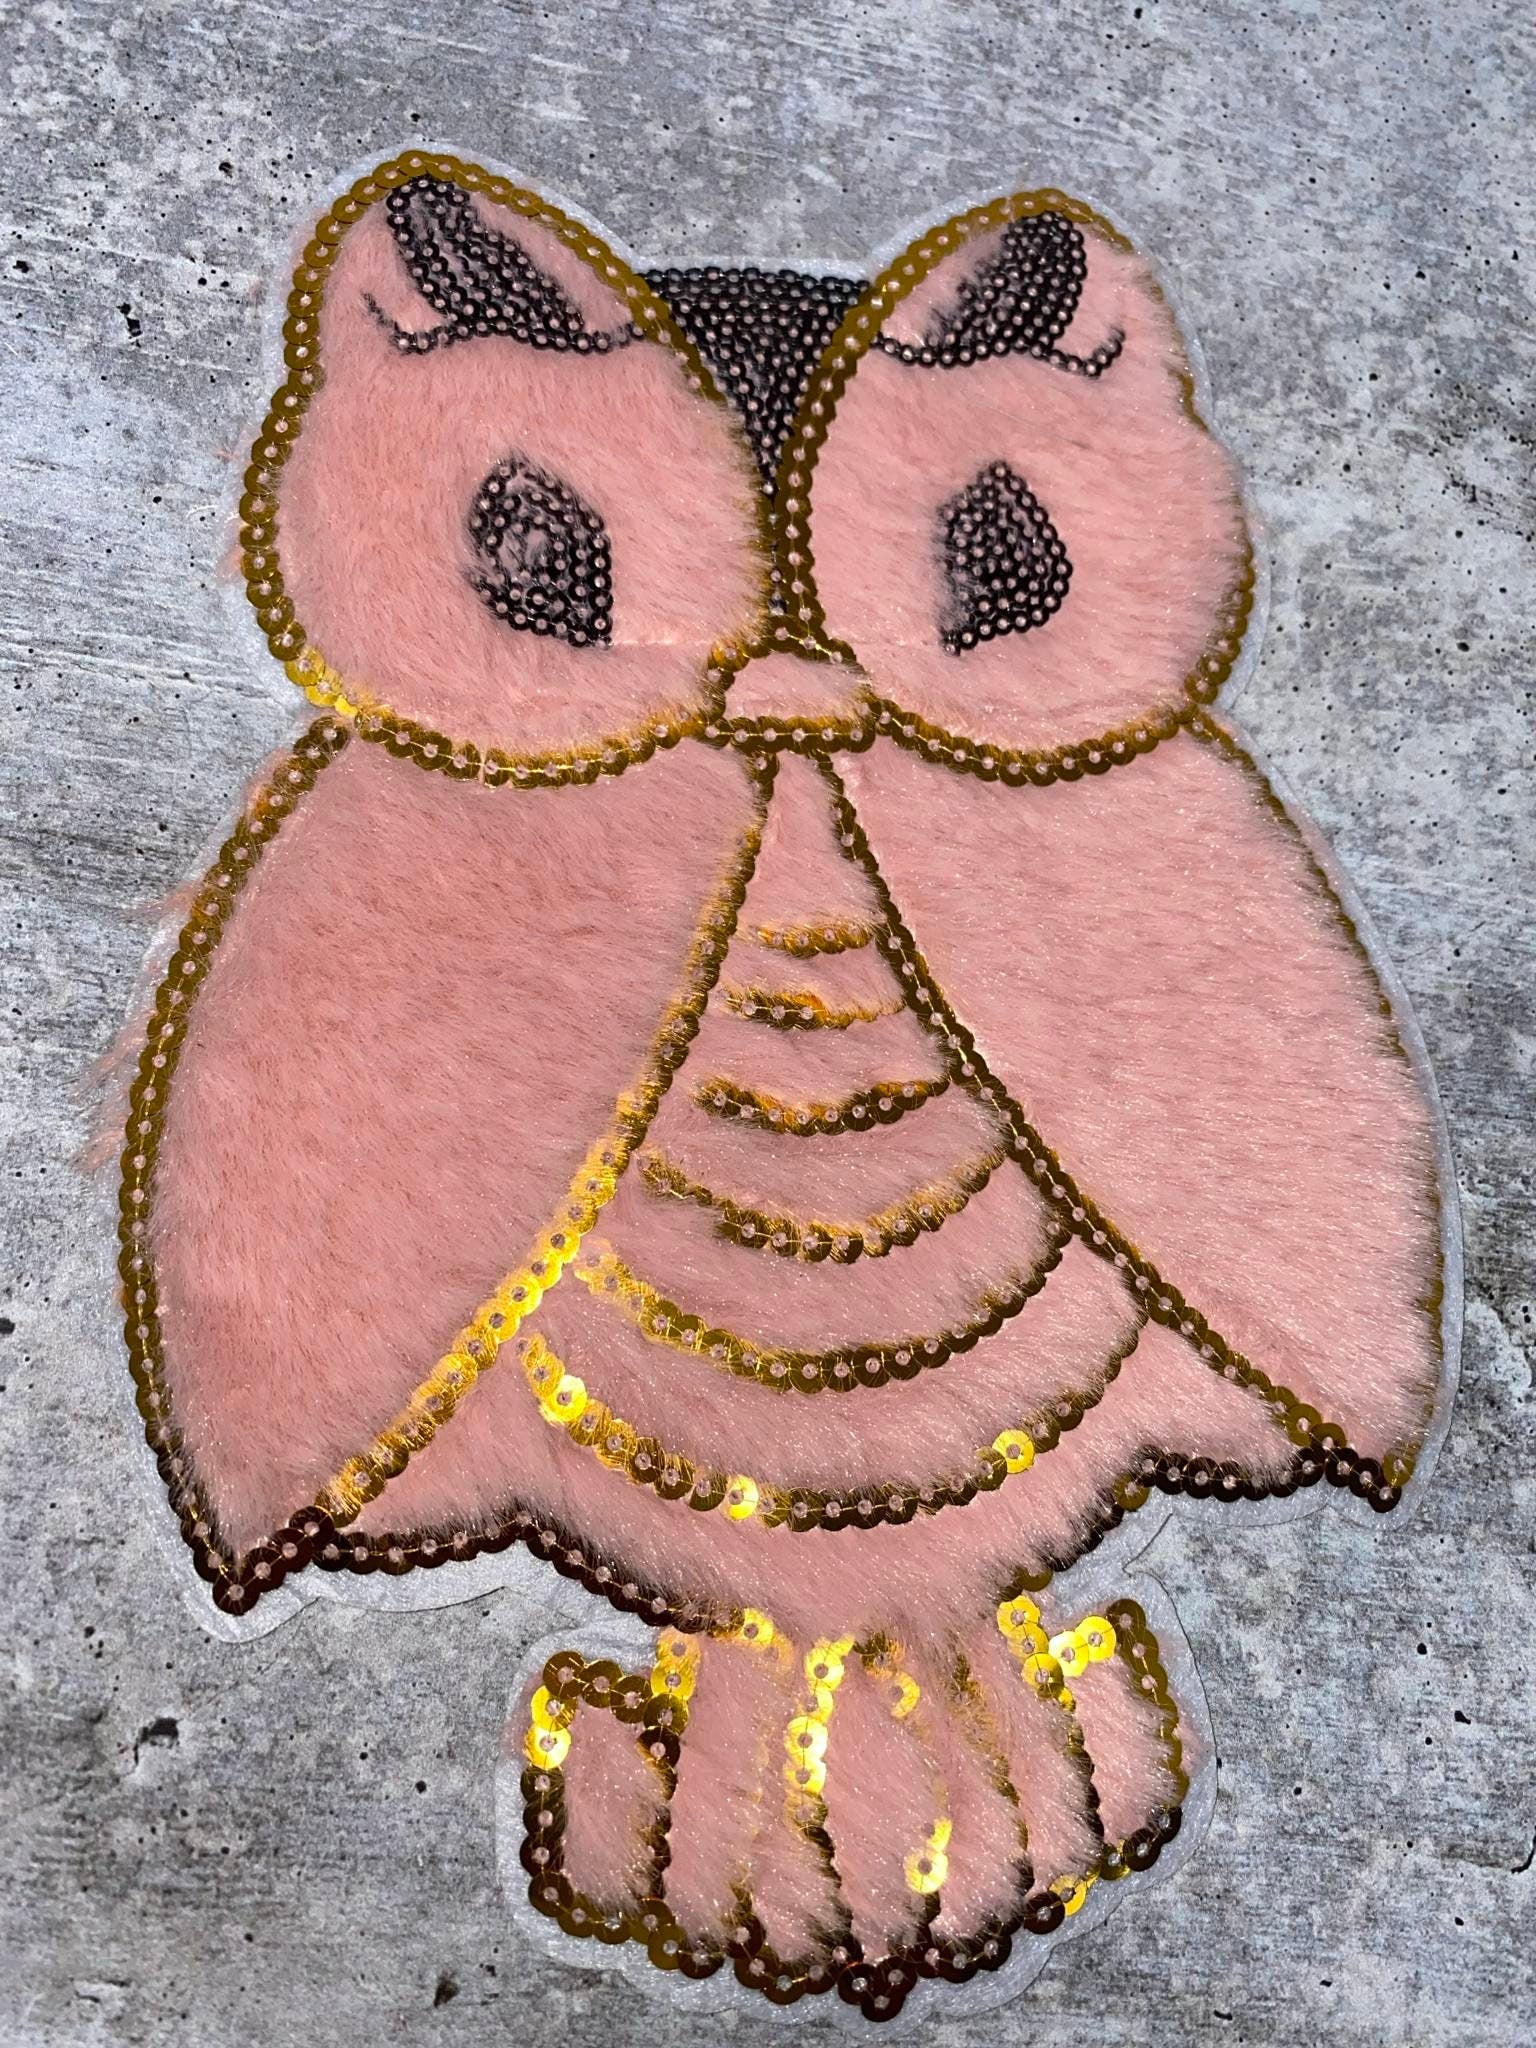 NEW, Pink & Gold, "OWL" Patch, Size 8", (sew-on), 1-pc Faux Fur and Sequins Fashion Applique, Patch for Clothing, Girls Jacket or Sweater